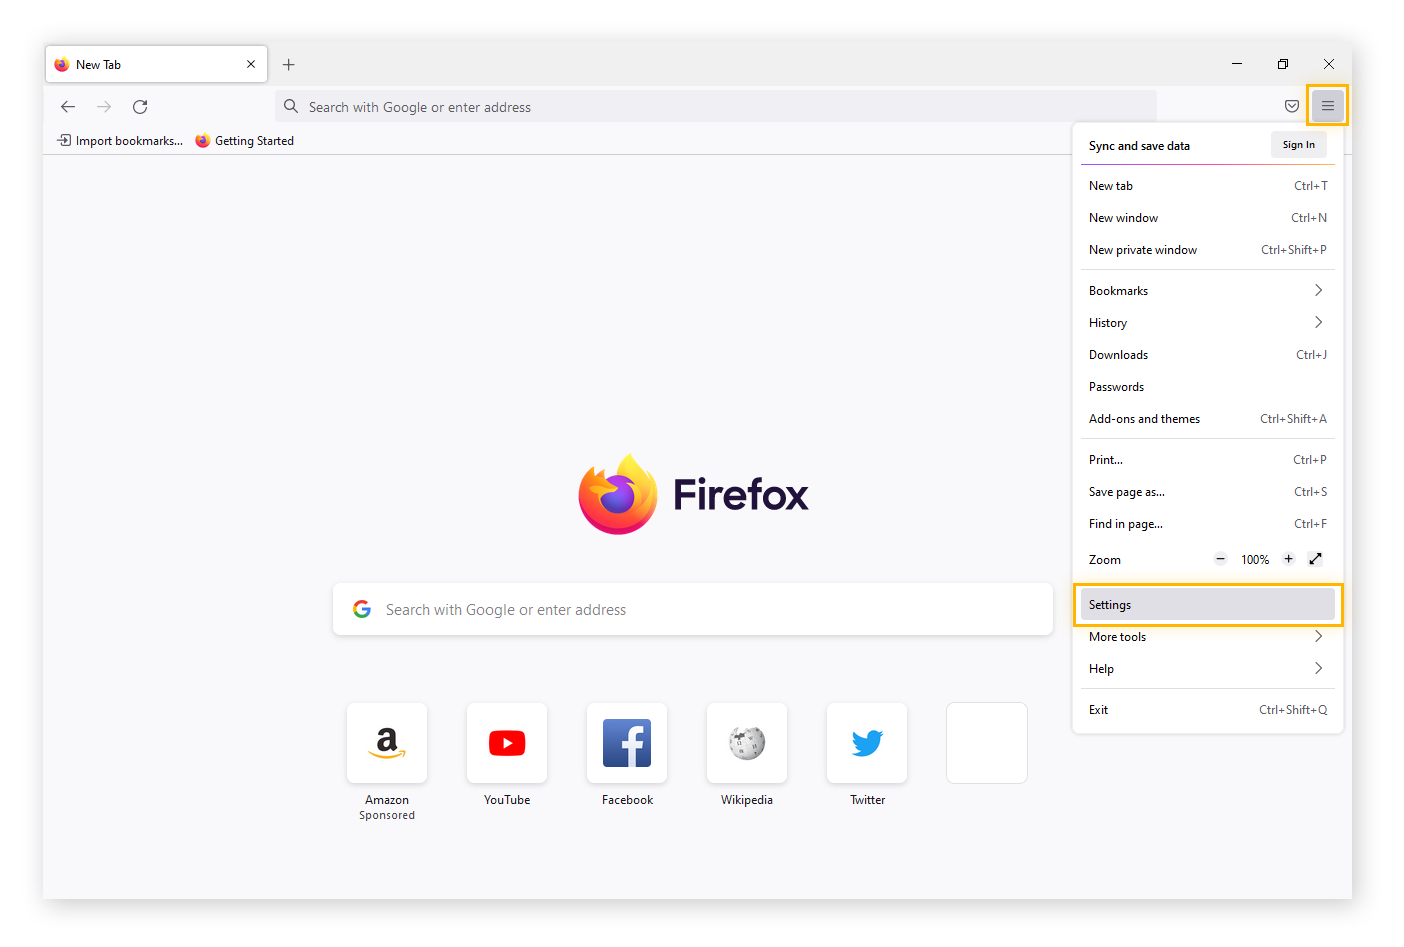 Access to Firefox browser settings.